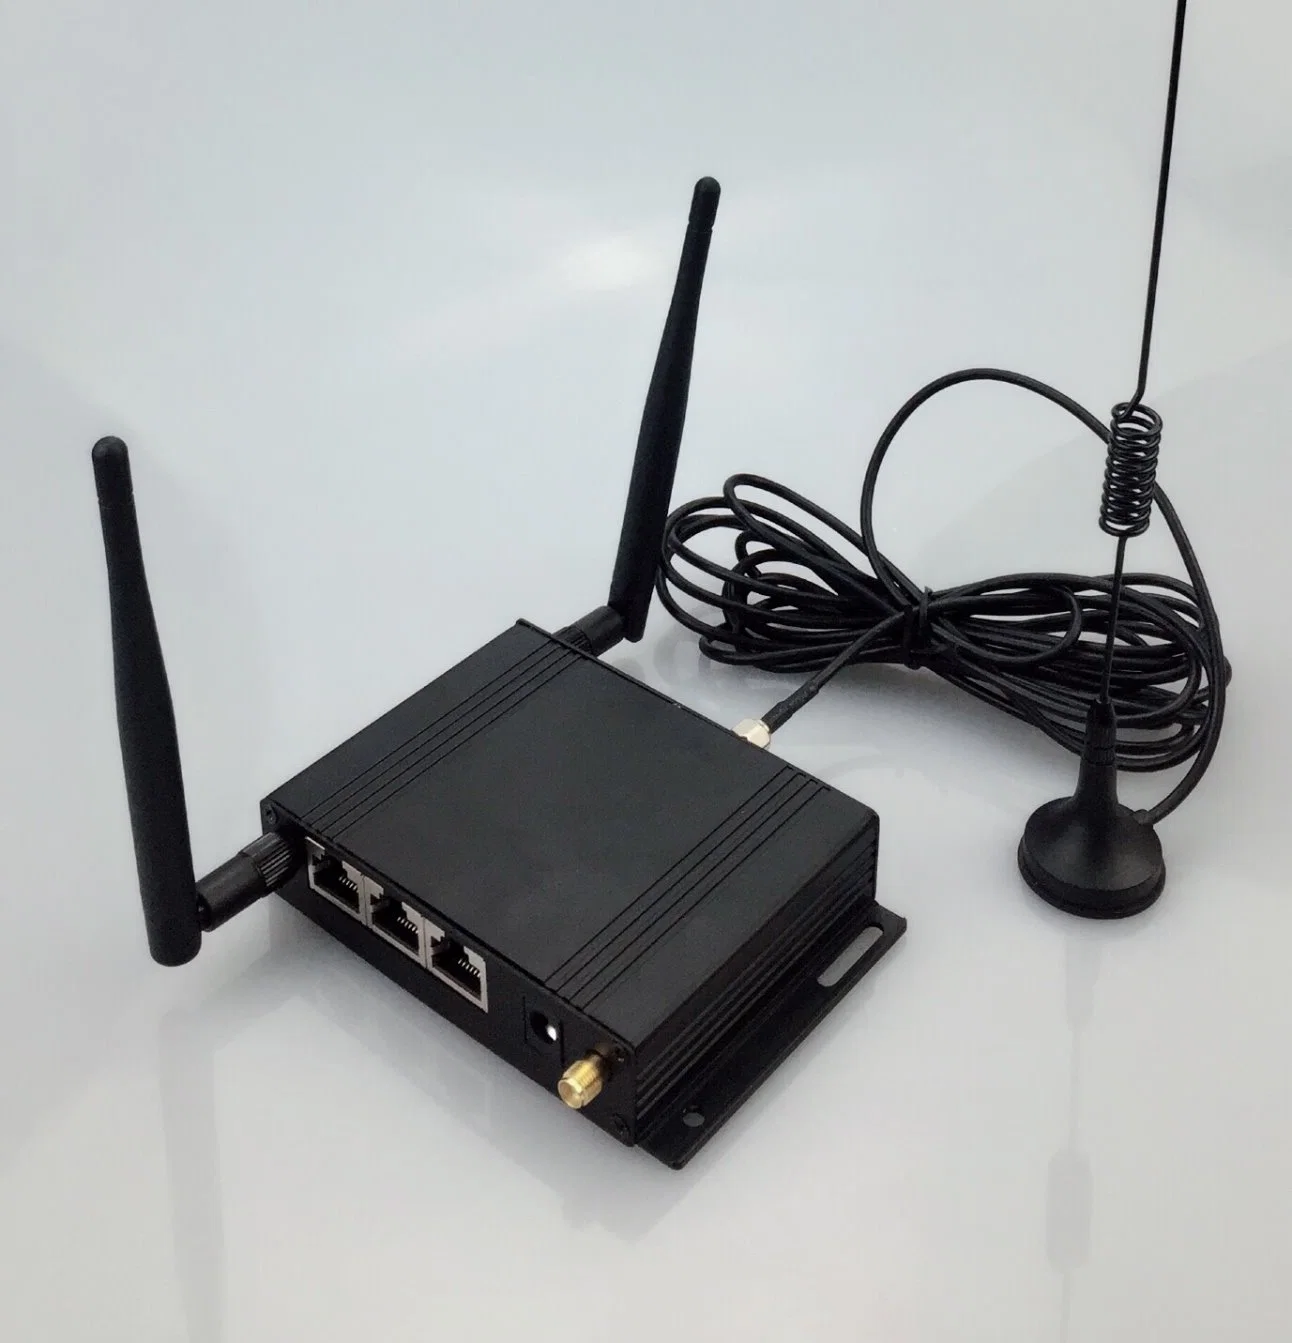 Industrial 3G/4G Modem Lte WiFi Router with SIM Card Slot and External Antenna Connector